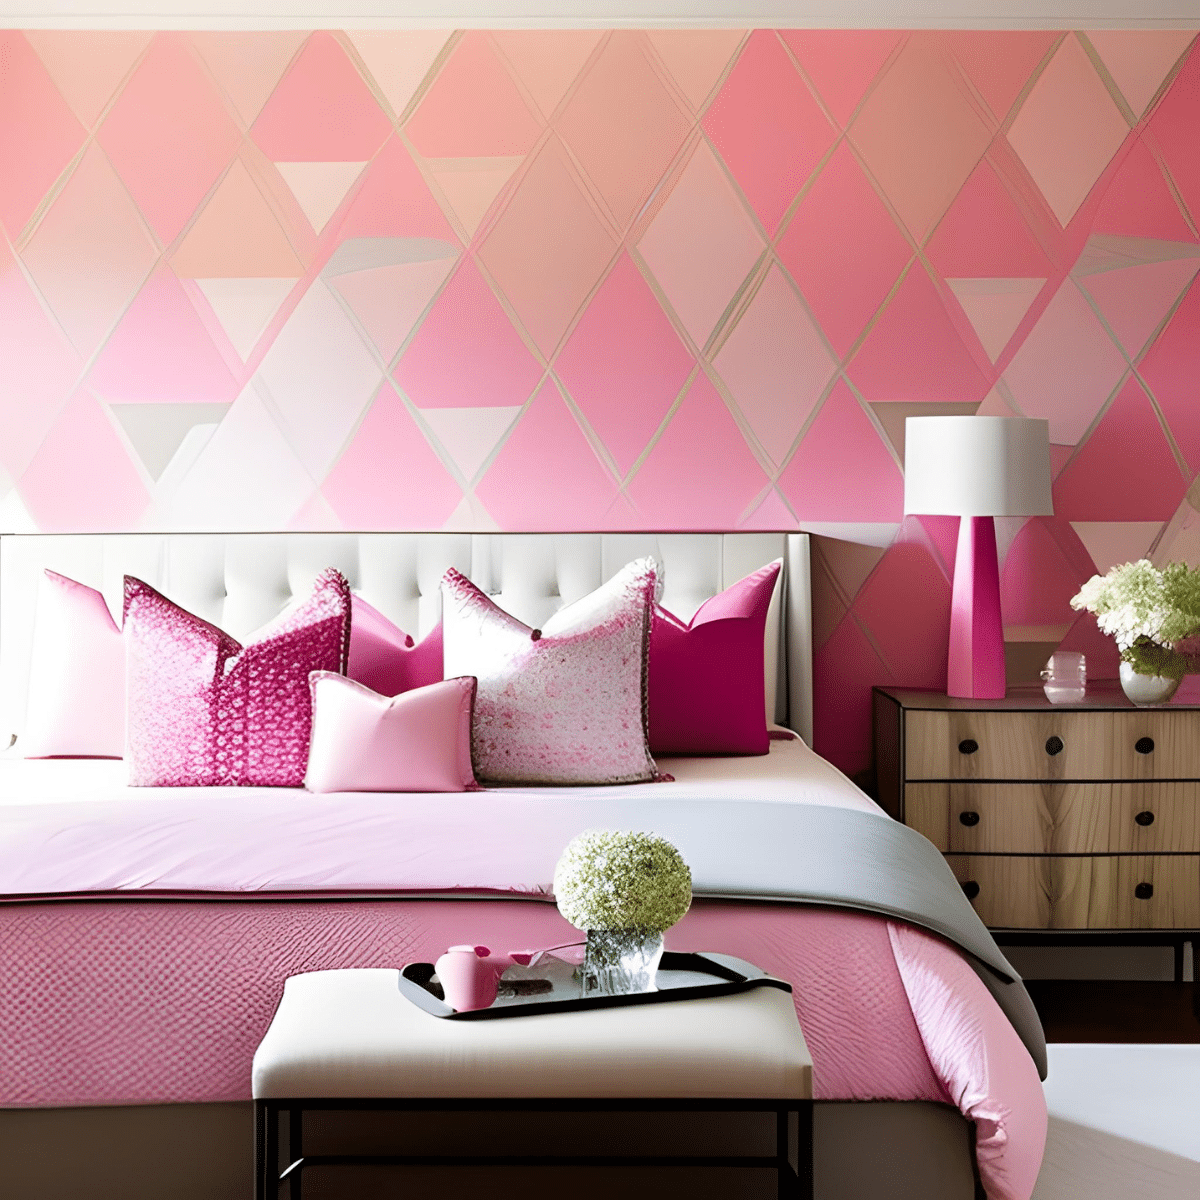 Bedroom with a geometric wallpaper and bed with pink sheets and pillows